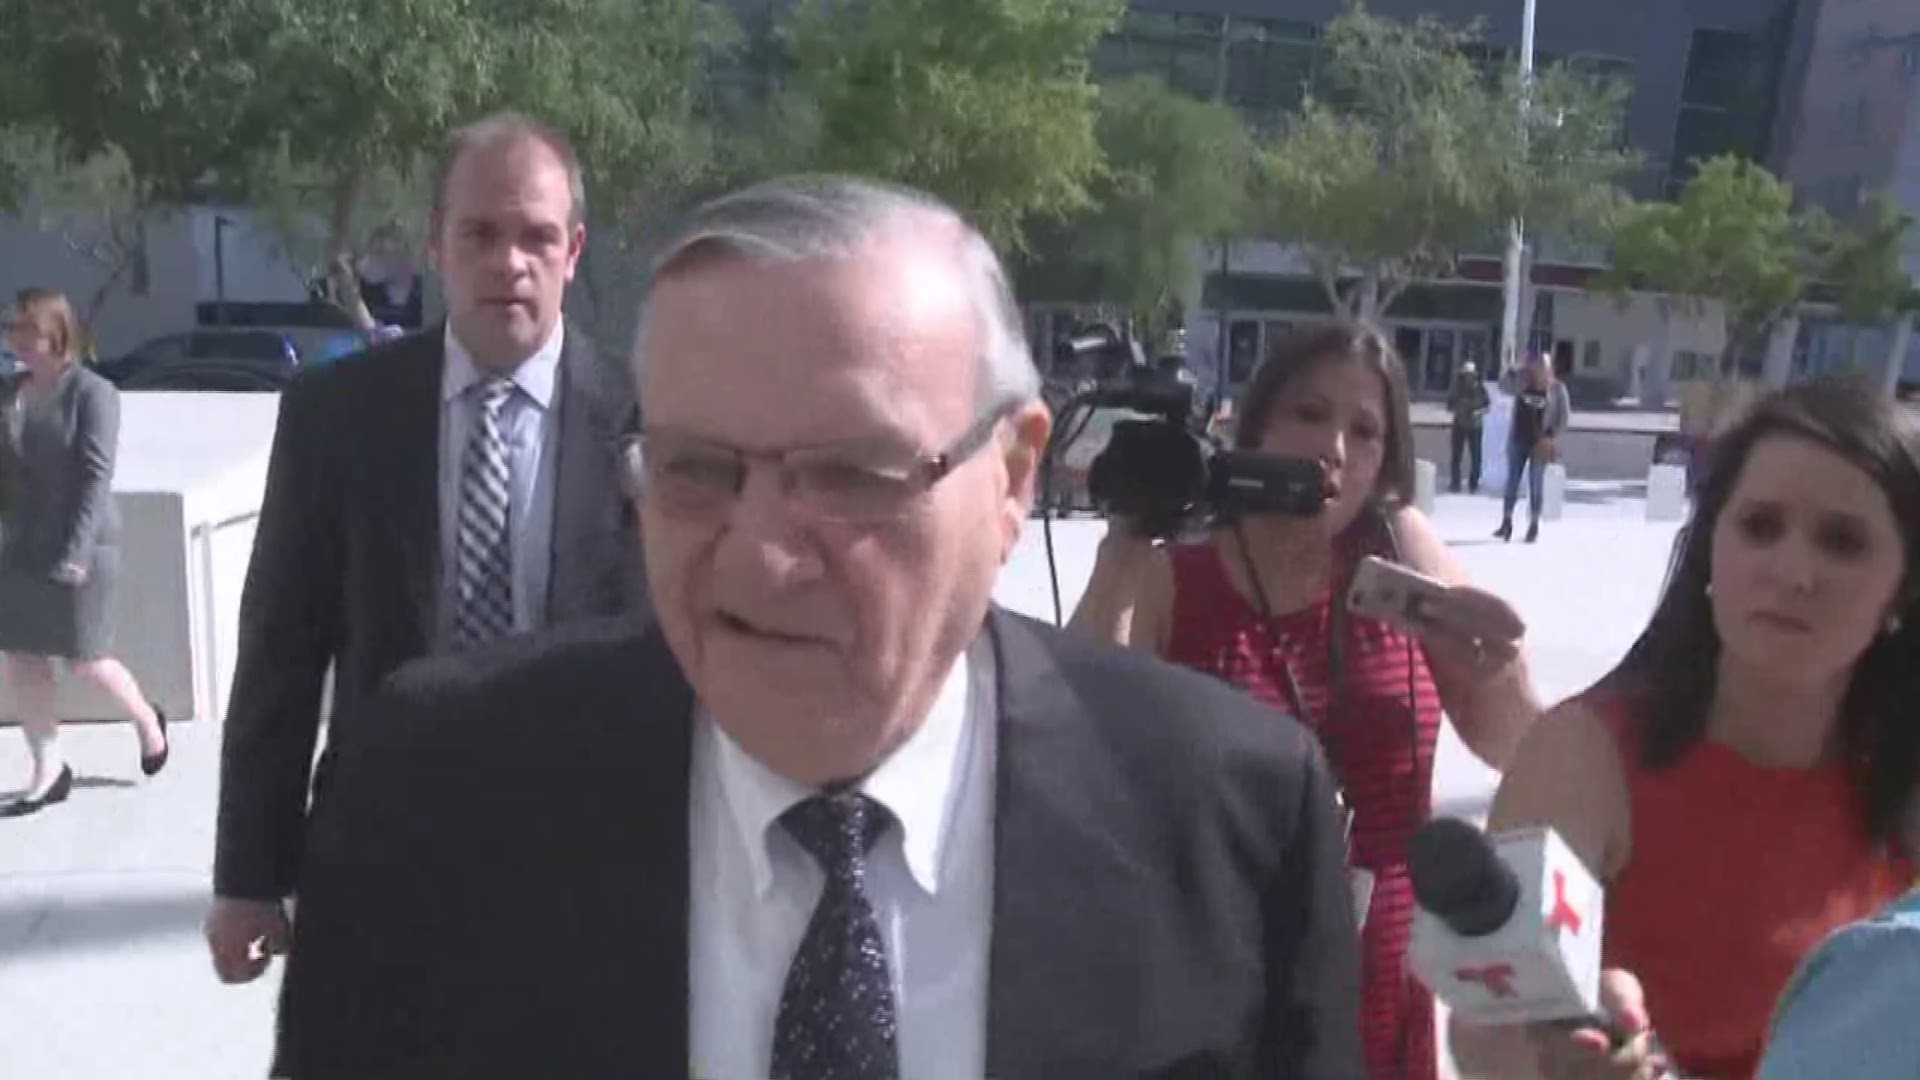 Federal prosecutors are now asking a judge to toss out Joe Arpaio's case altogether.